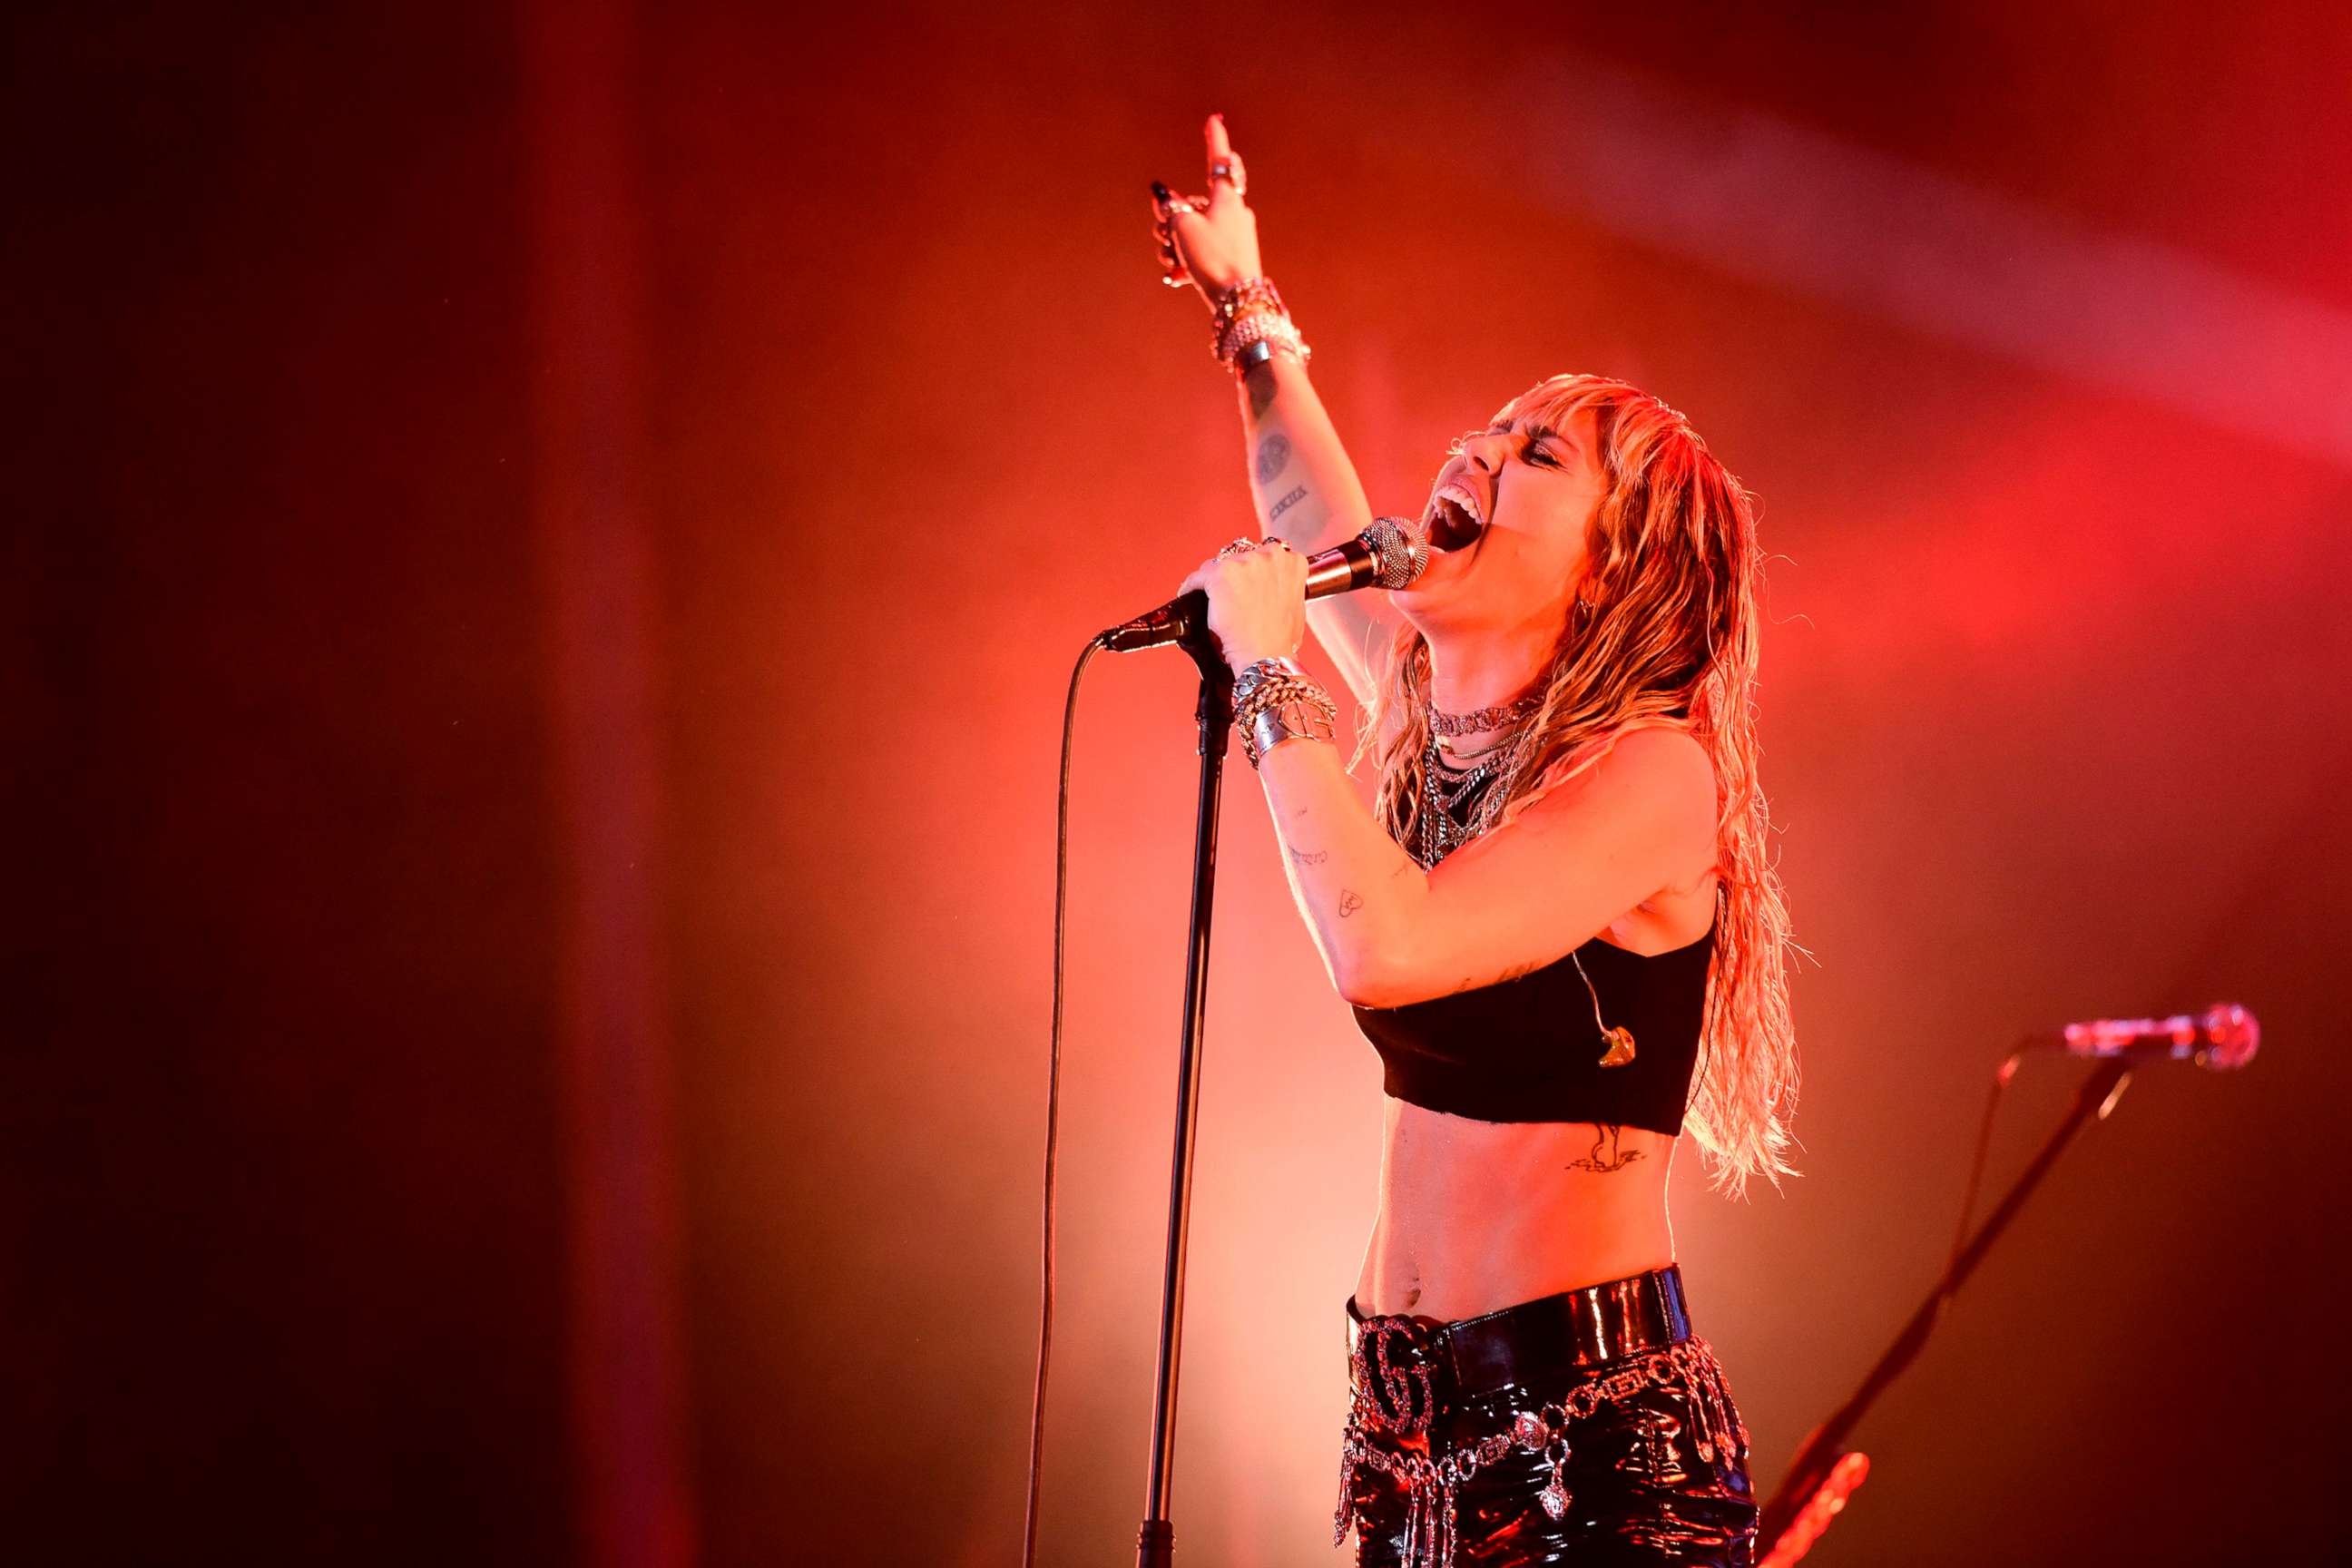 PHOTO: Miley Cyrus performs on stage during a concert at the Sunny Hill Festival in Pristina, Kosovo, August 2, 2019.